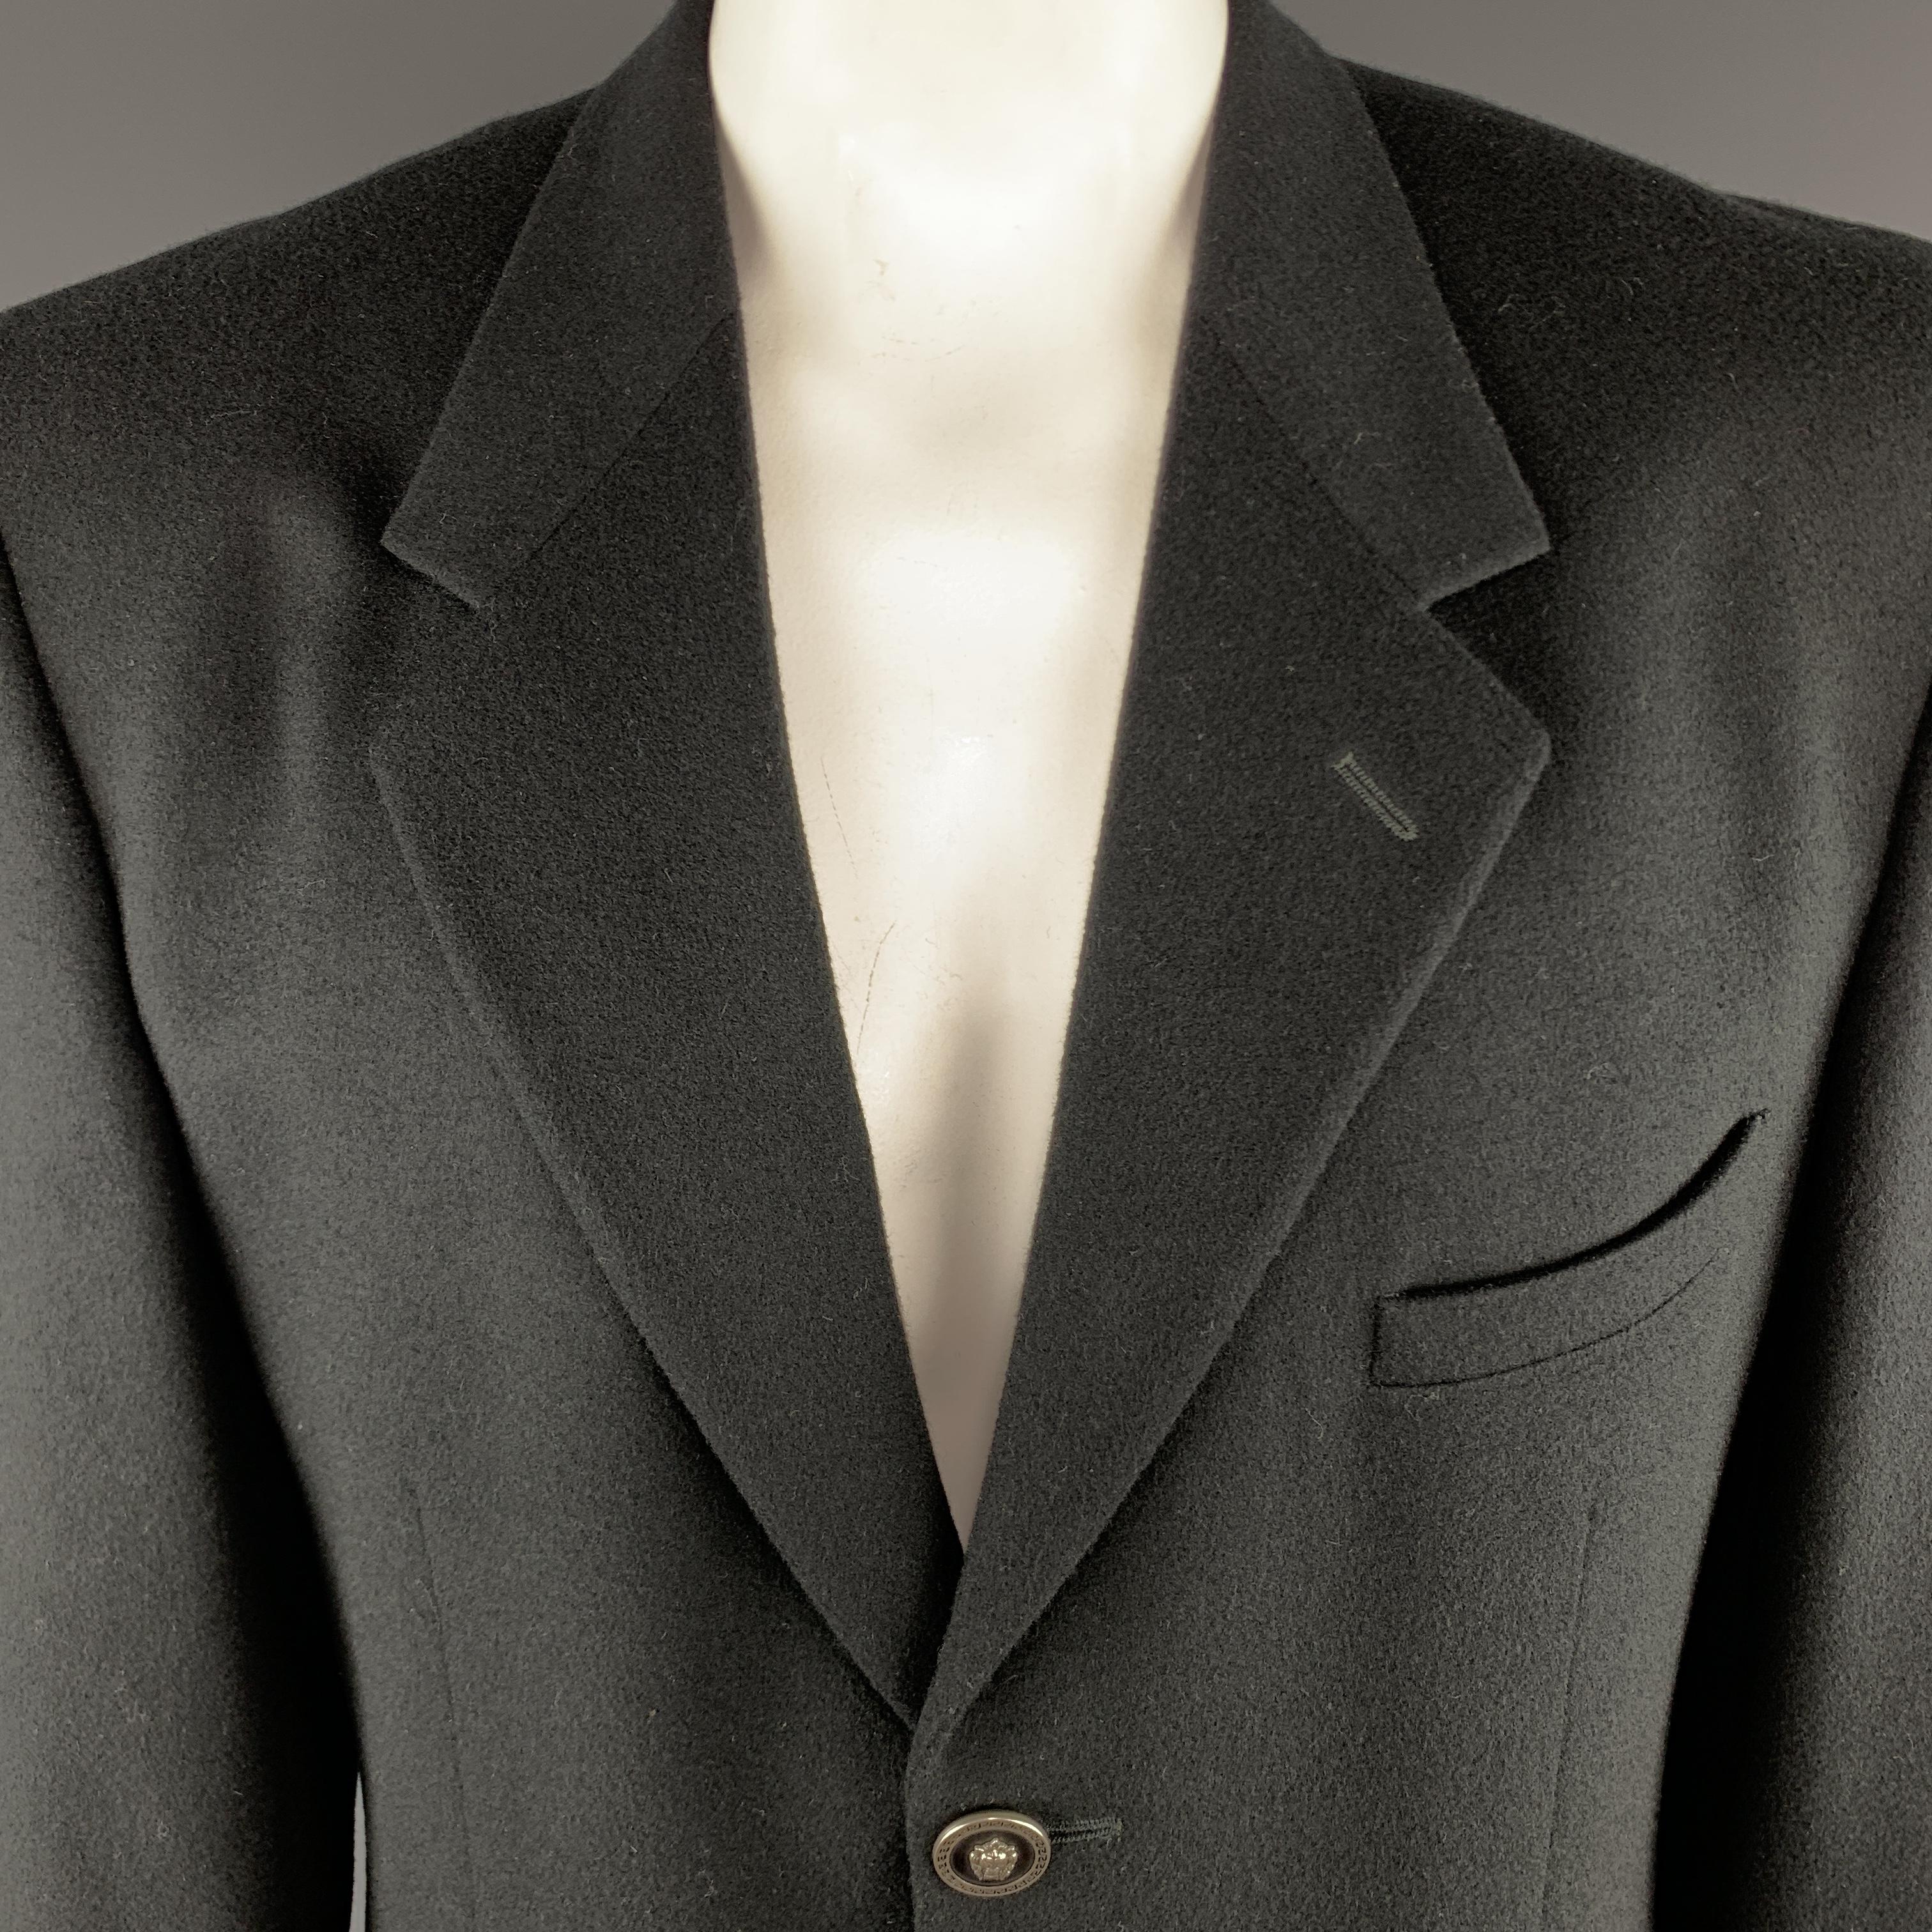 Vintage VERSUS by GIANNI VERSACE Sport Coat comes in a black tone in a solid wool / cashmere material, with a notch lapel, embossed buttons, slit pockets, three buttons at closure, single breasted, and buttoned cuffs. Made in Italy. 

Excellent